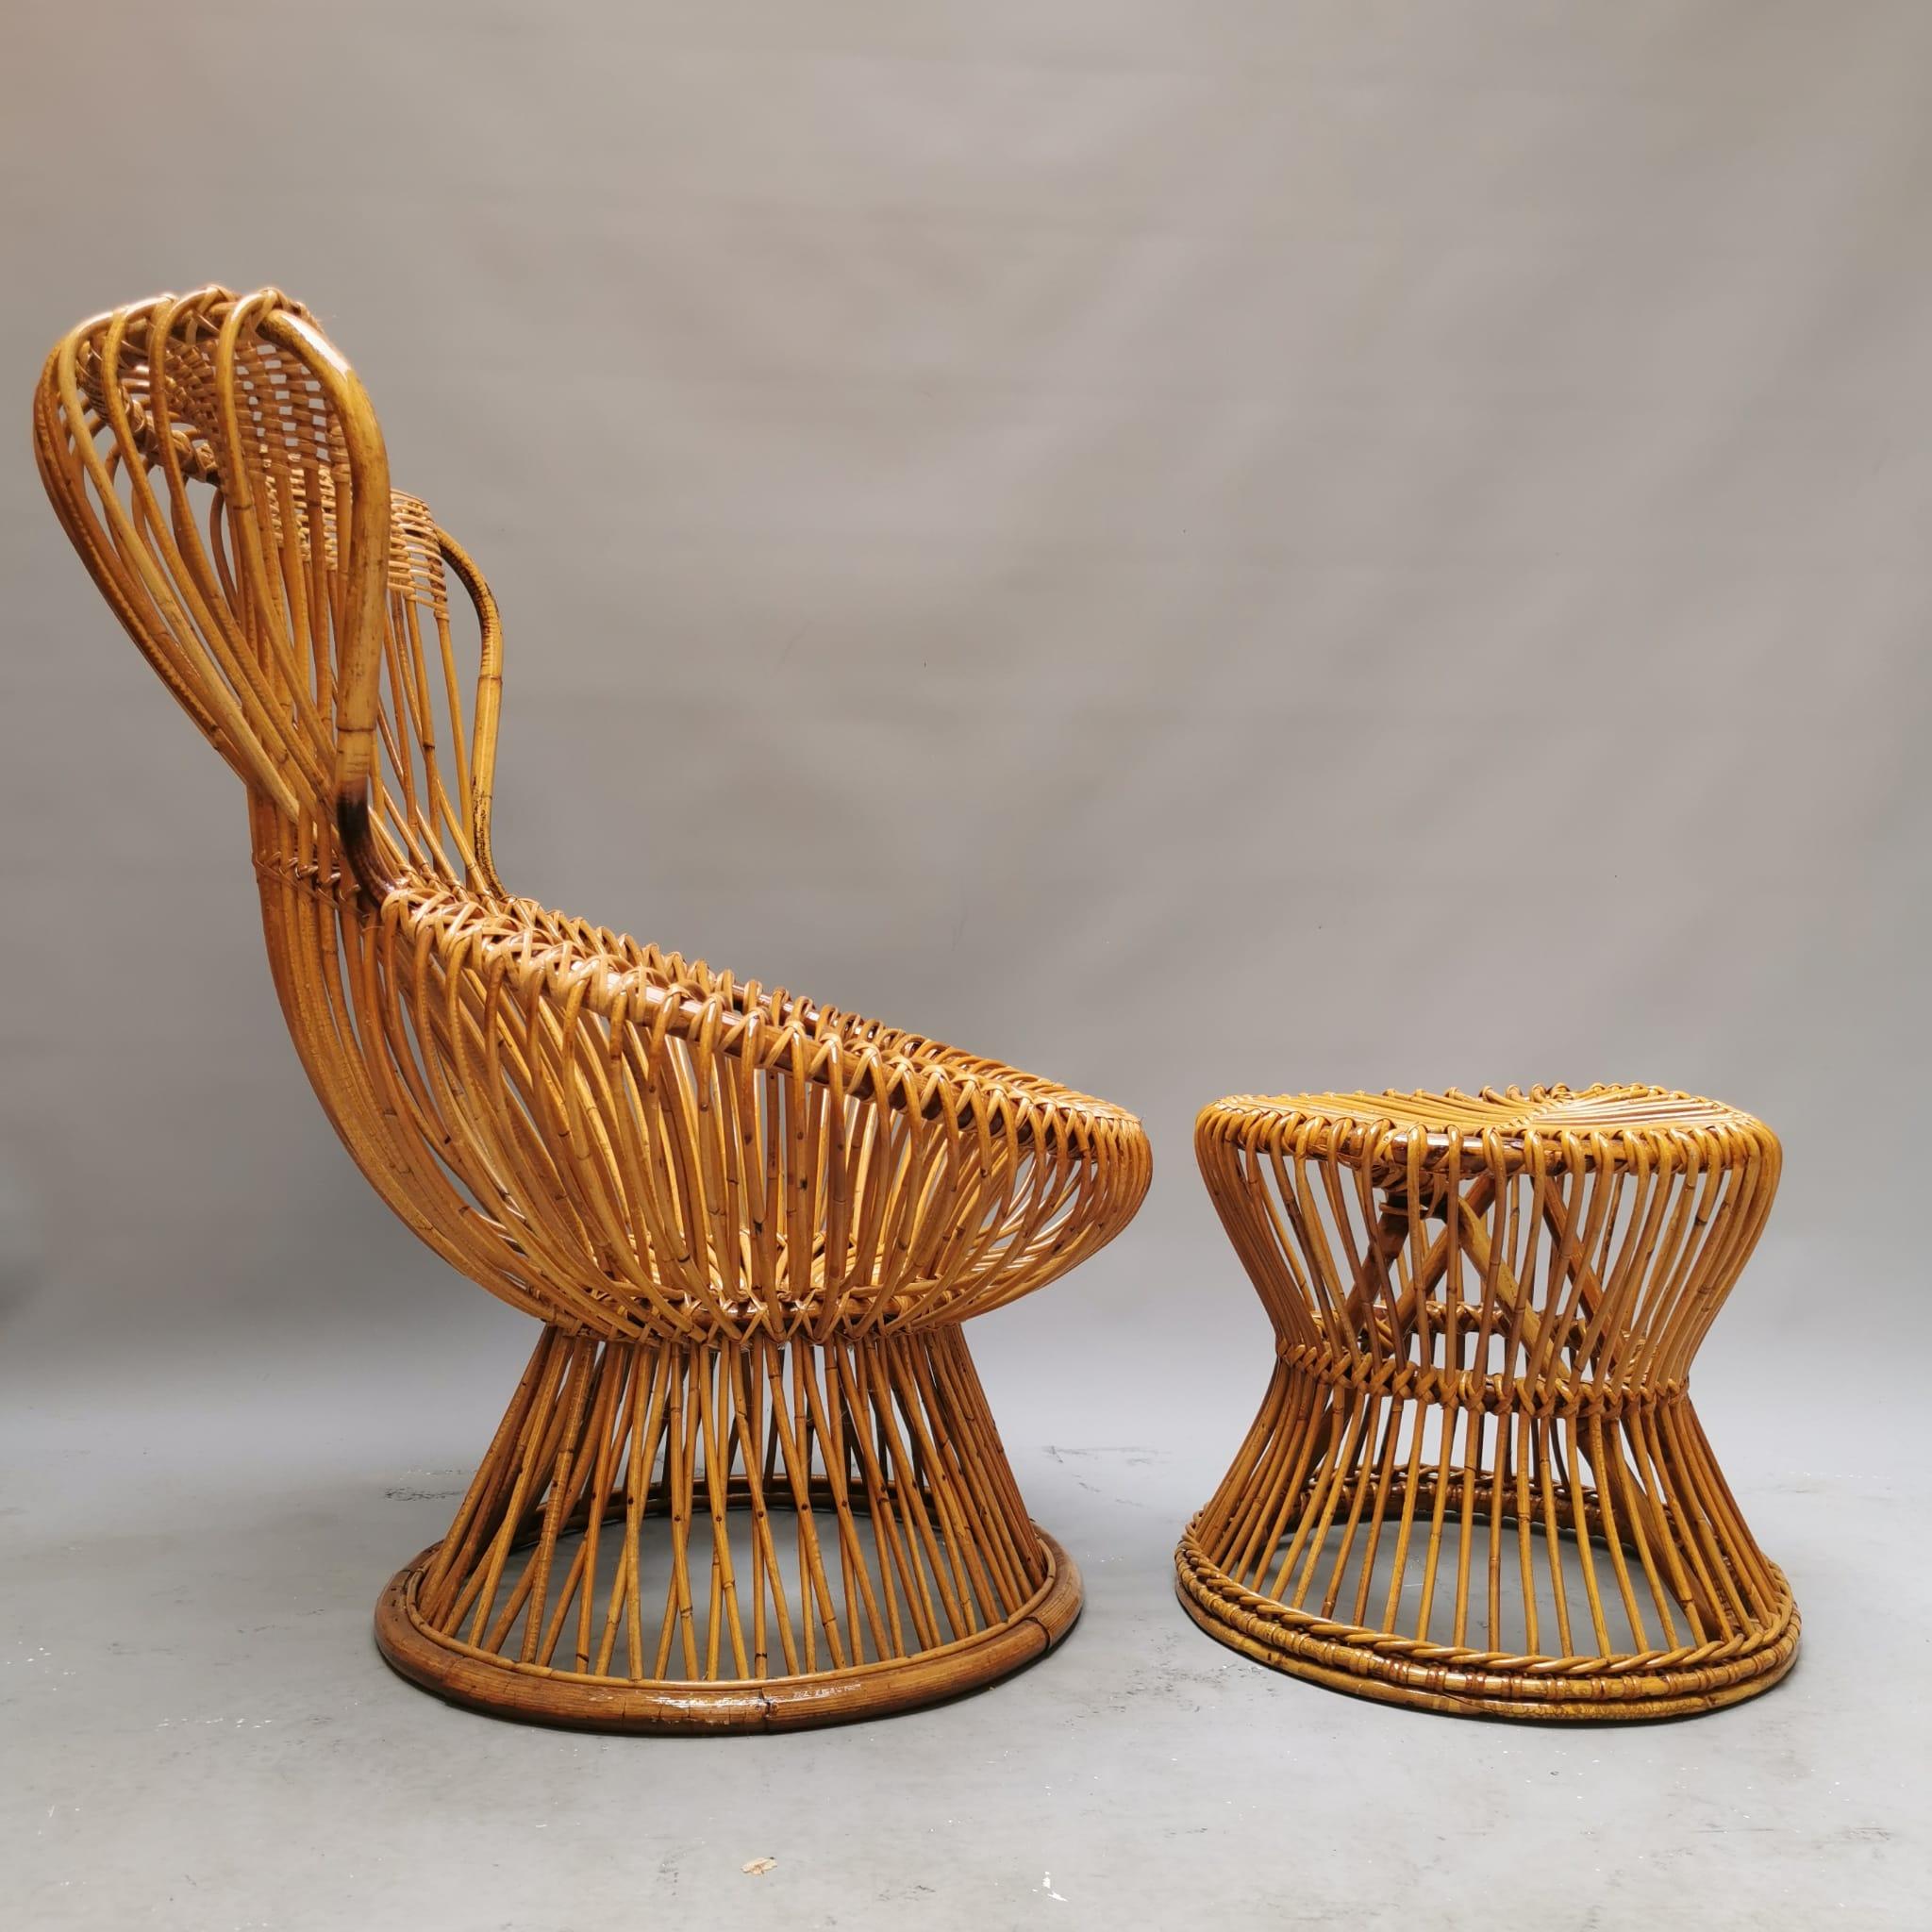 Just after the war, Albini experimented with the use of simple, low-cost materials such as thin, elastic wicker. Margherita is the first legless armchair of Italian design. Made with a frame composed of sixty reeds of Indian rush and four malacca